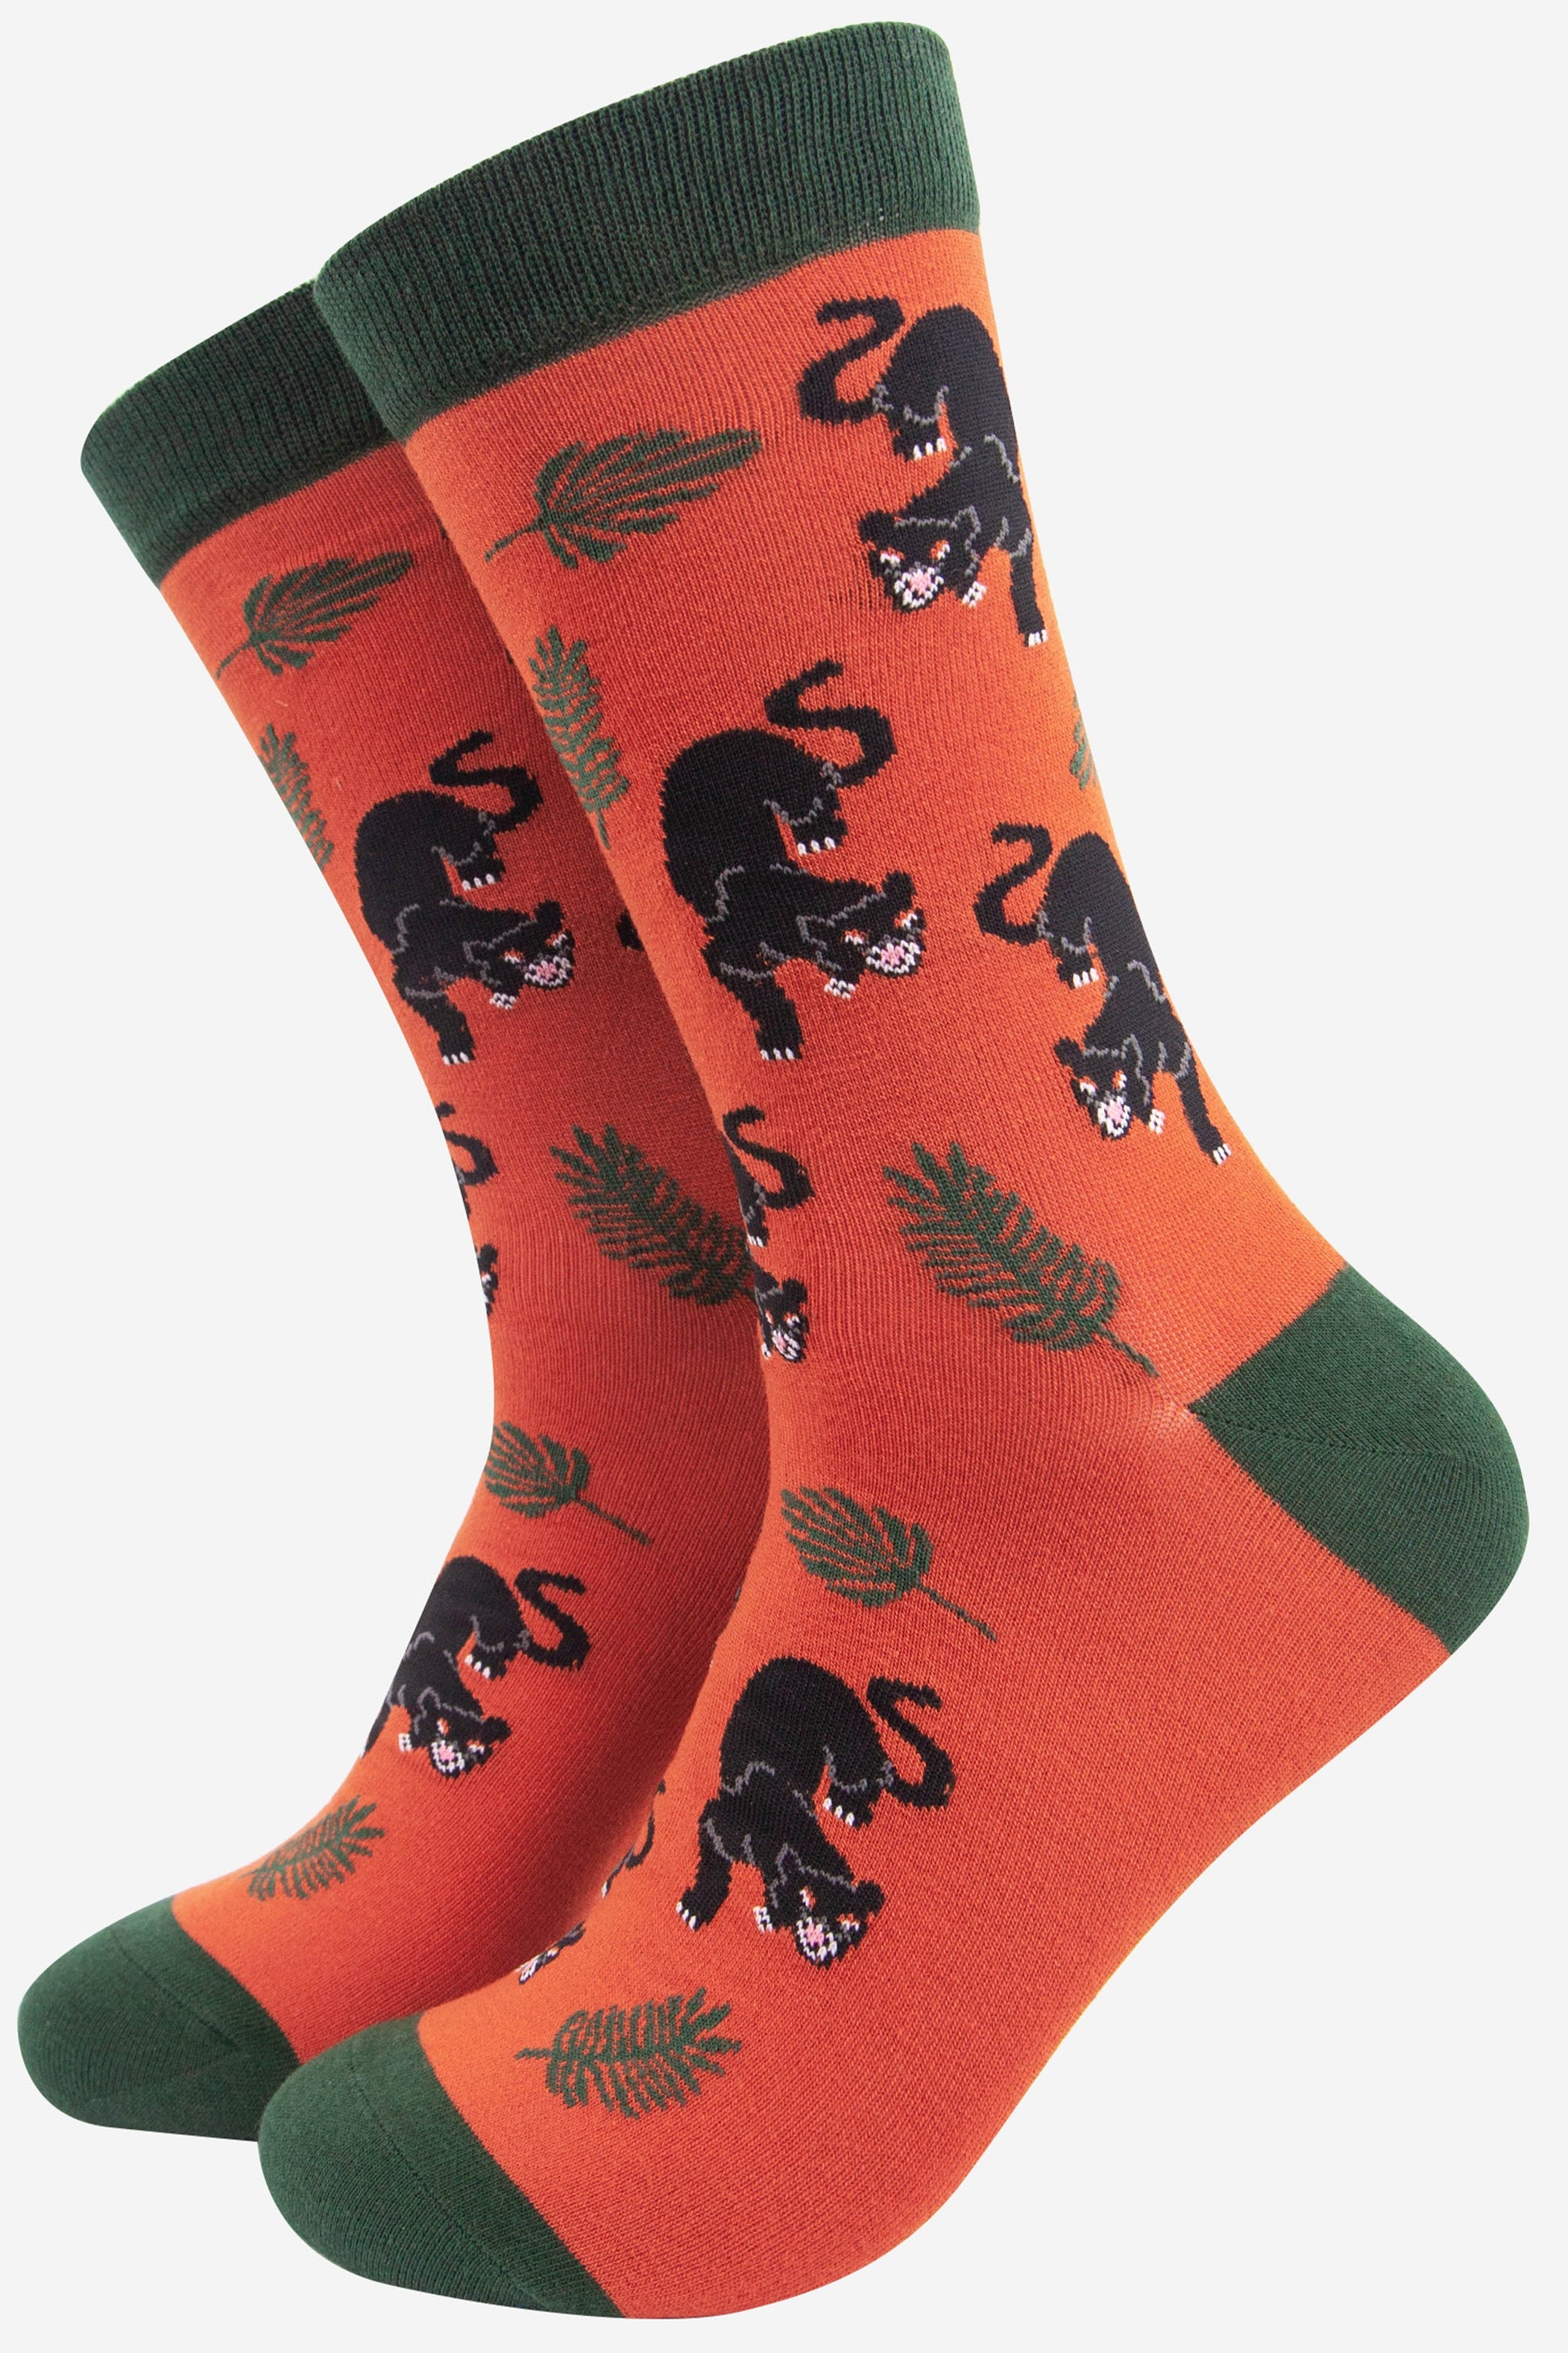 orange and green bamboo dress socks featuring a black panther big cat with a jungle leaf design